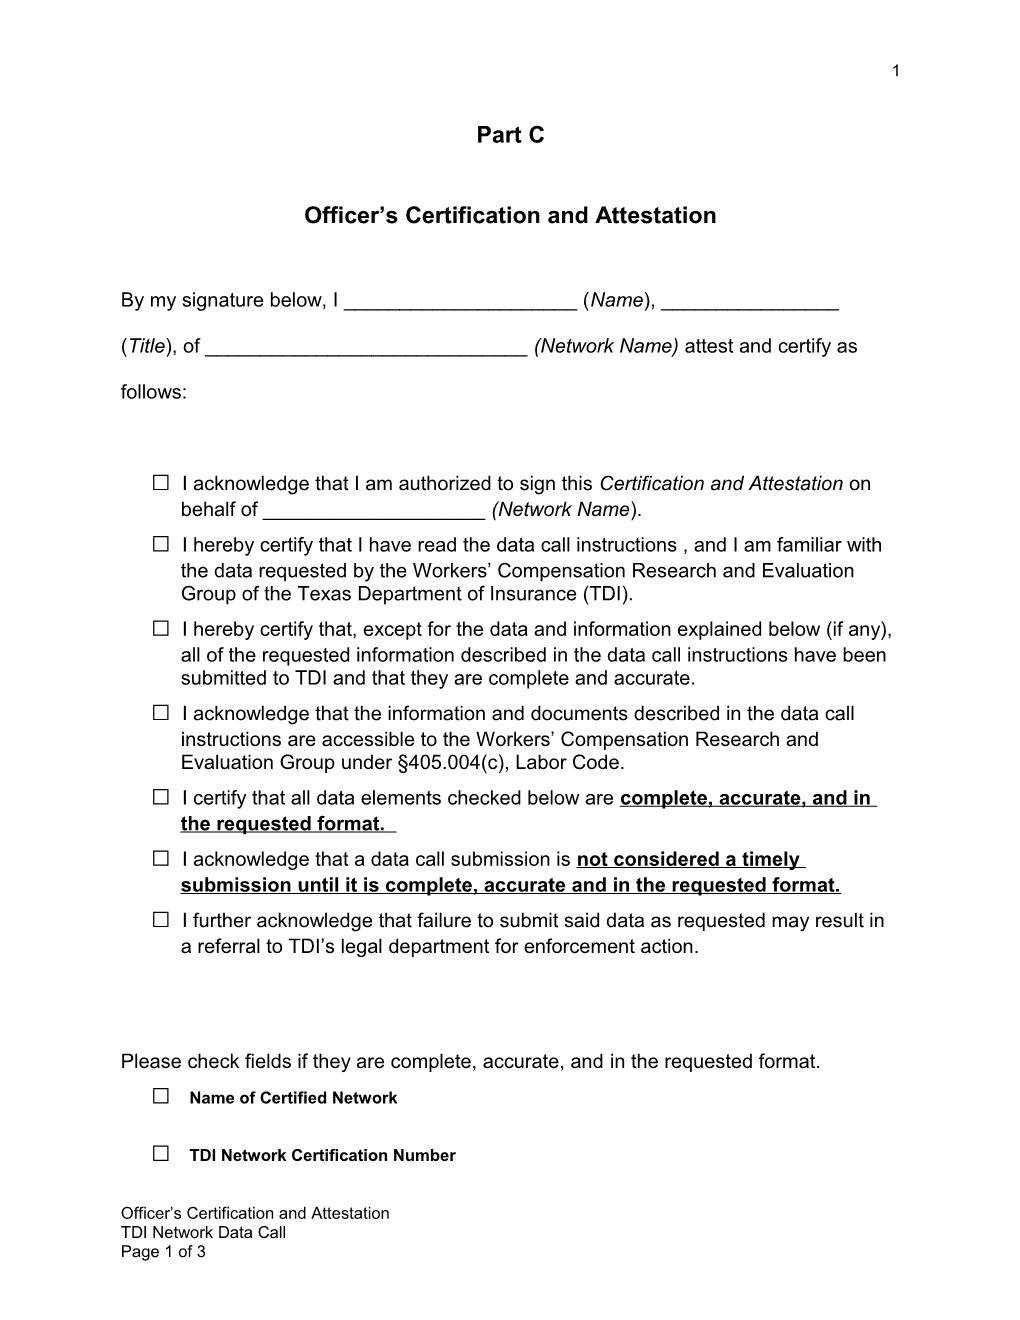 Officers Certification and Attestation